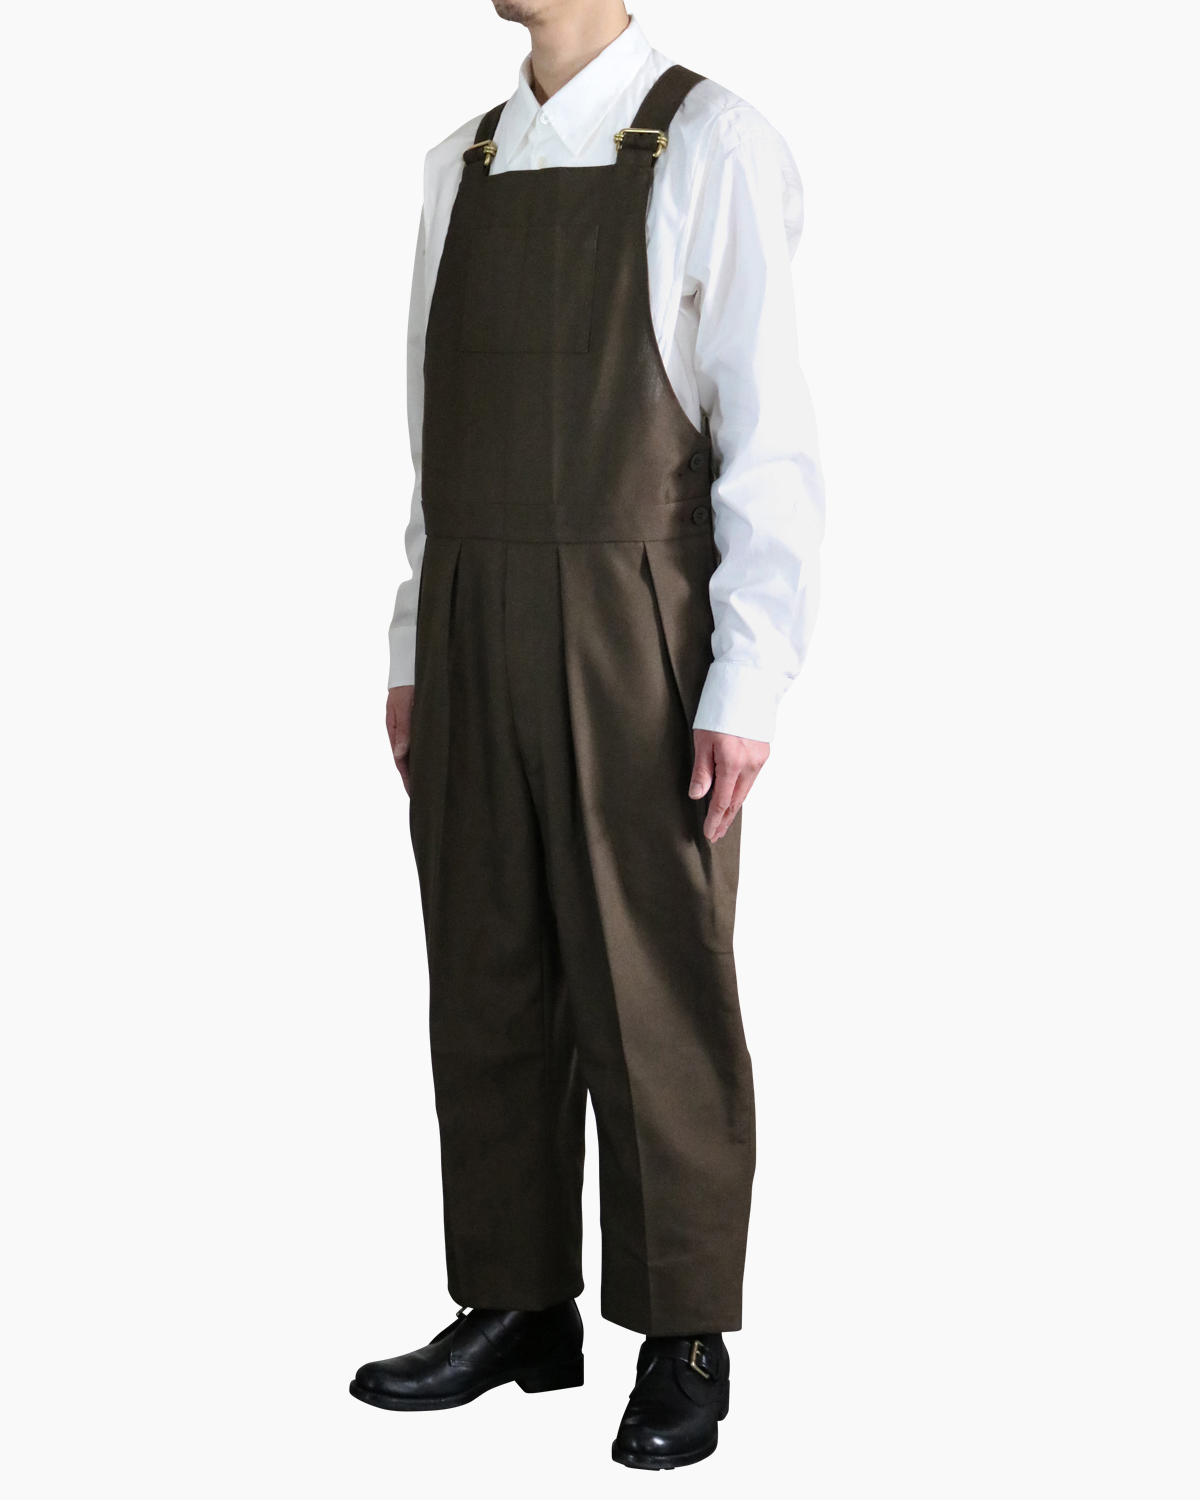 NEAT｜HOPSACK｜OVERALL - Khaki｜PRODUCT｜Continuer Inc.｜メガネ ...